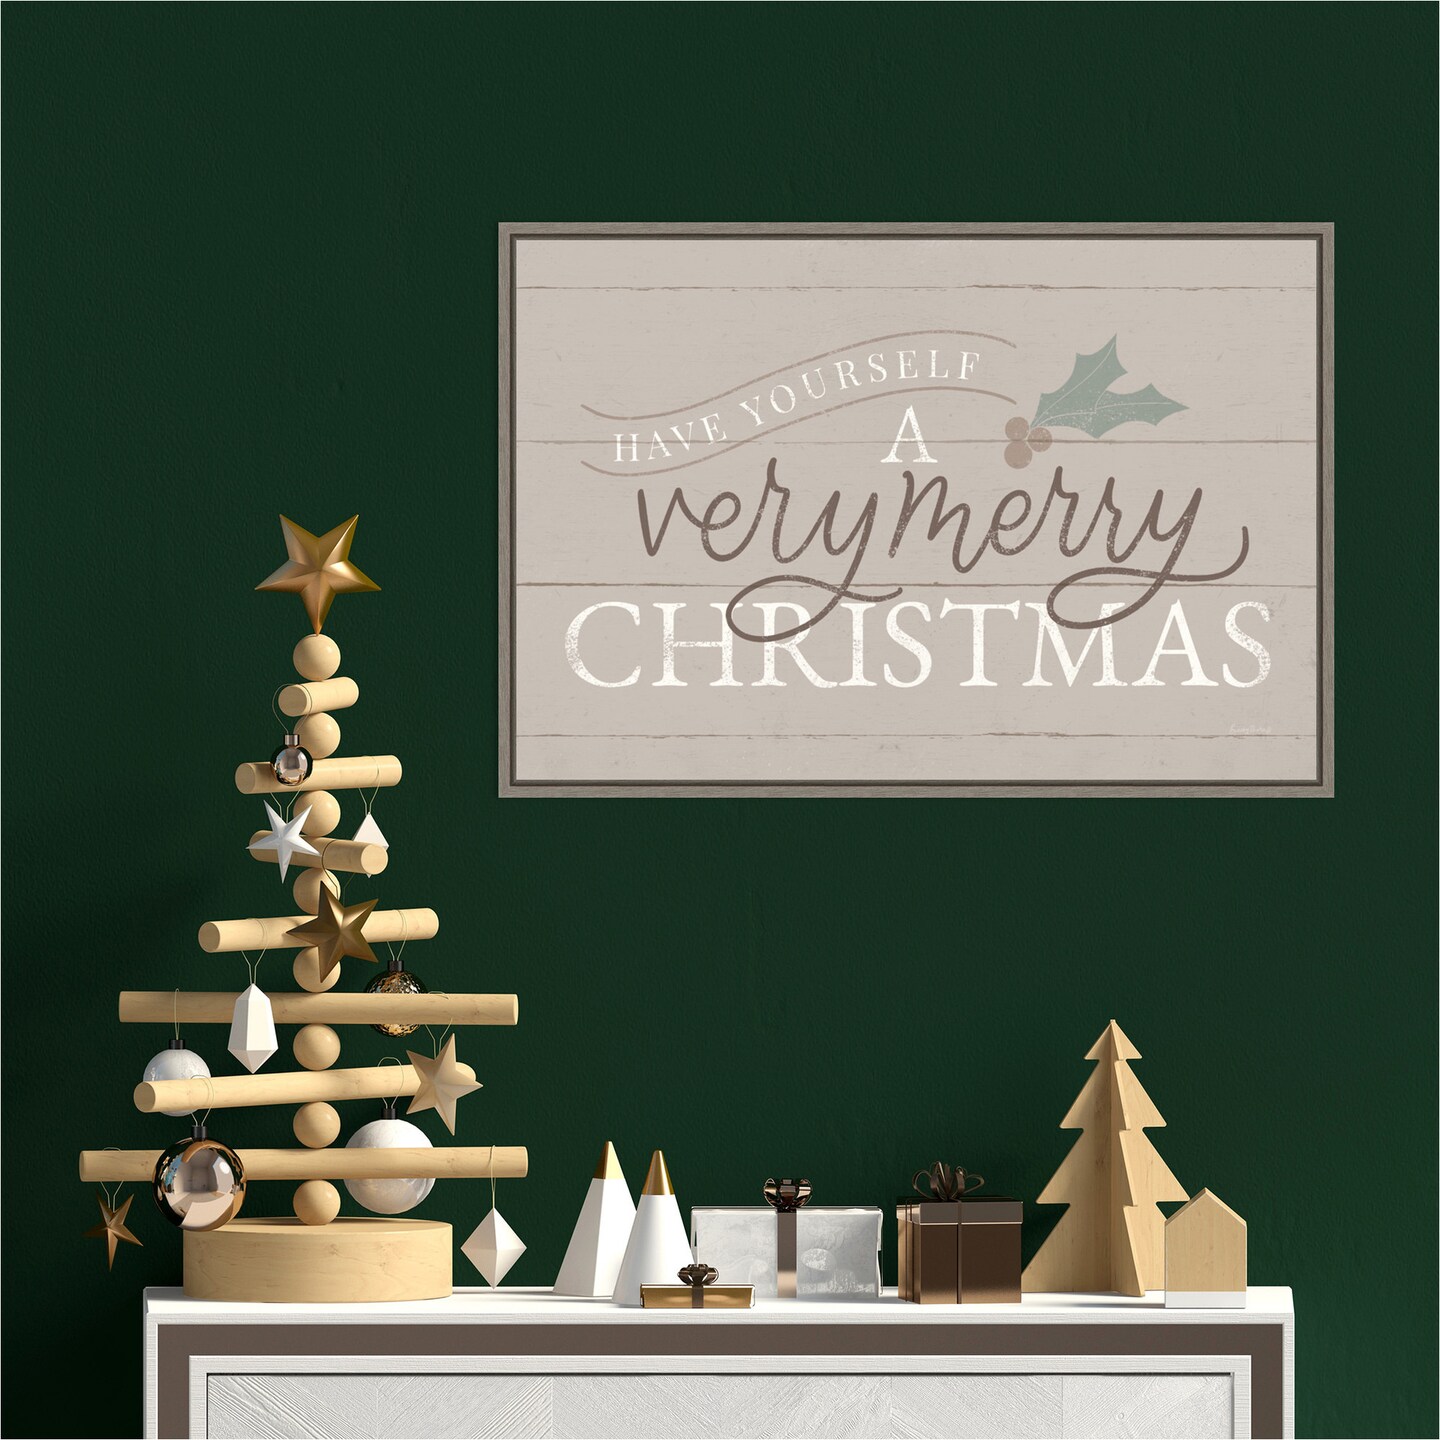 Vintage Christmas IV Neutral by Becky Thorns 23-in. W x 16-in. H. Canvas Wall Art Print Framed in Grey